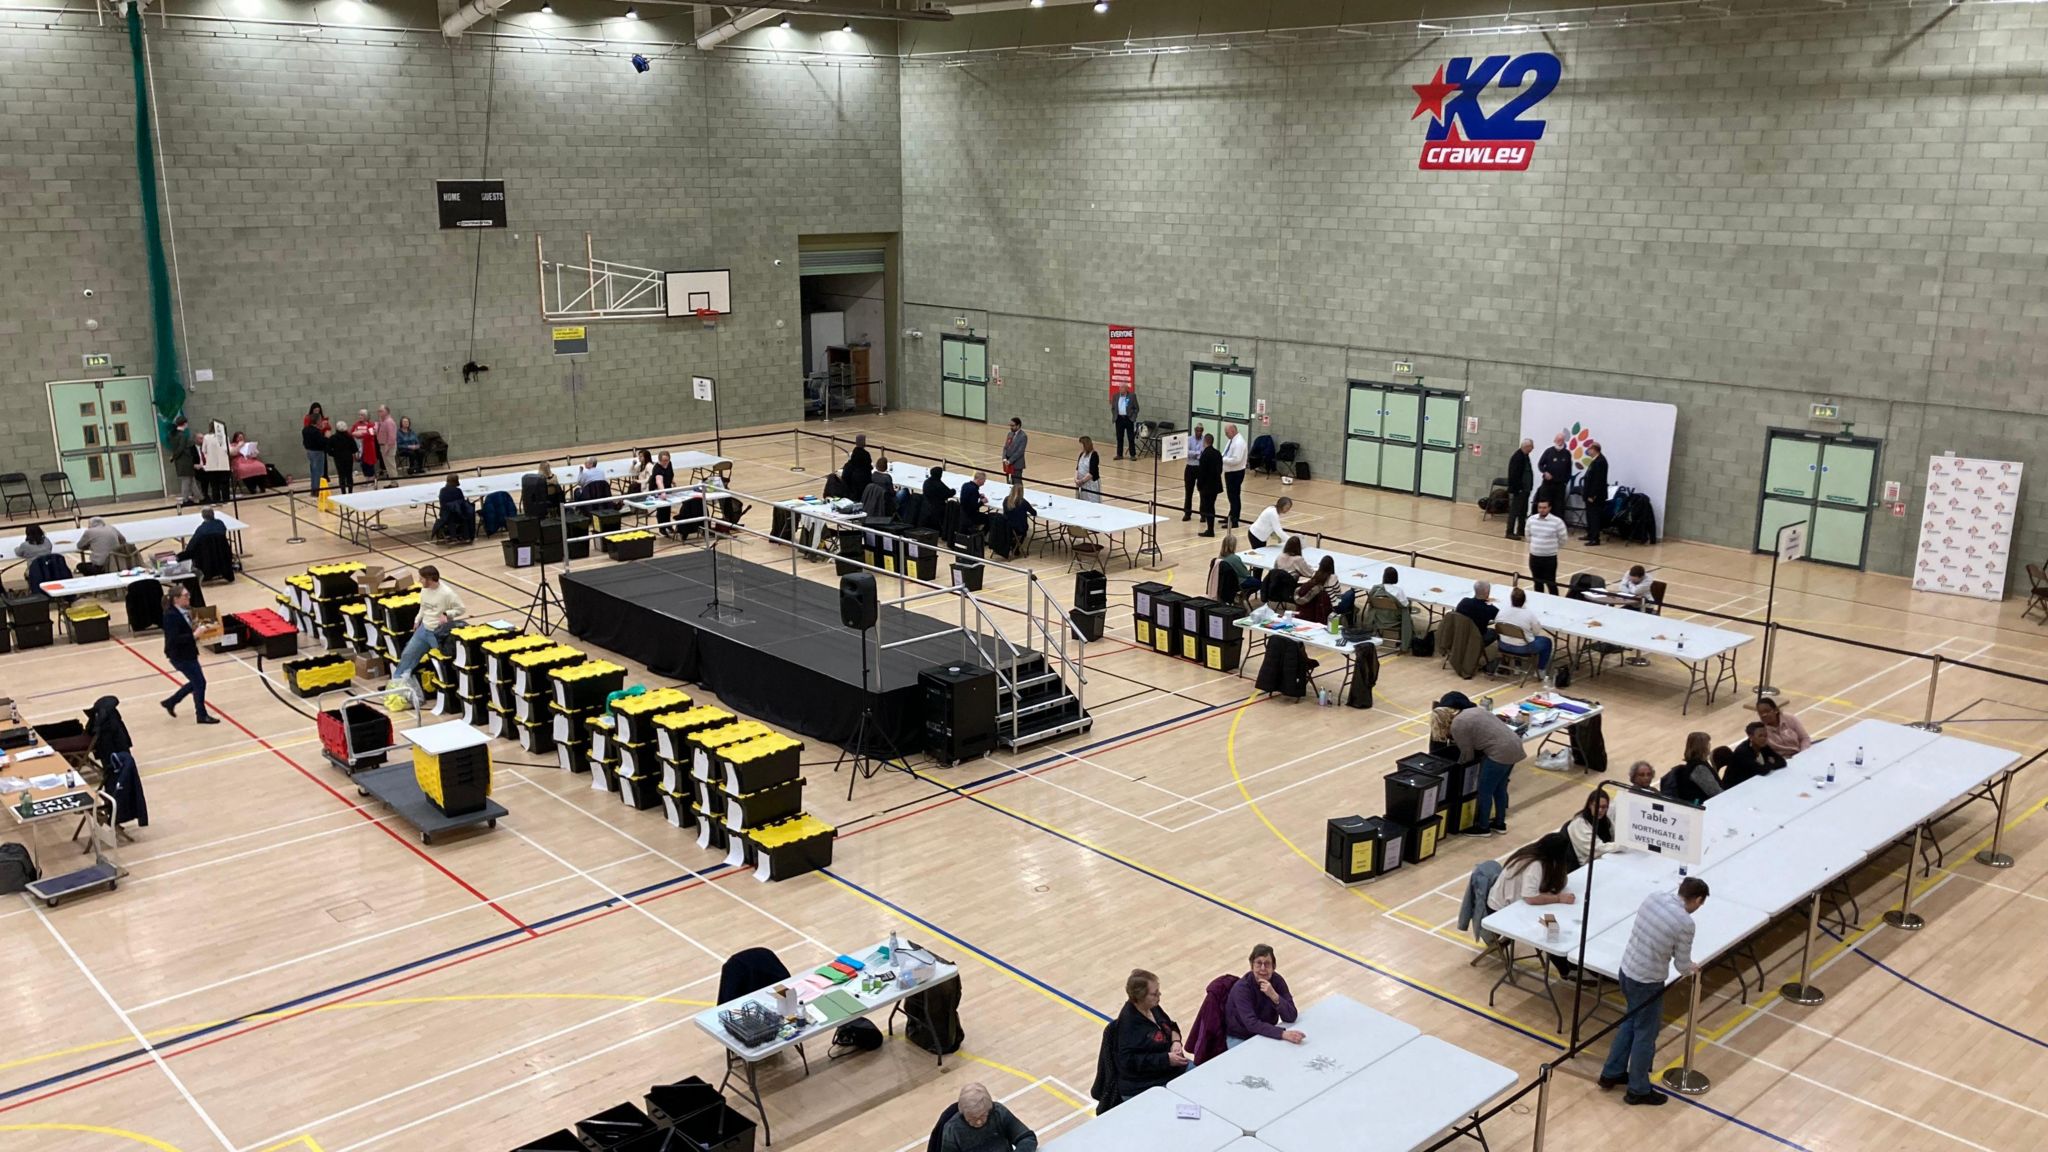 Votes being counted at the K2 leisure centre